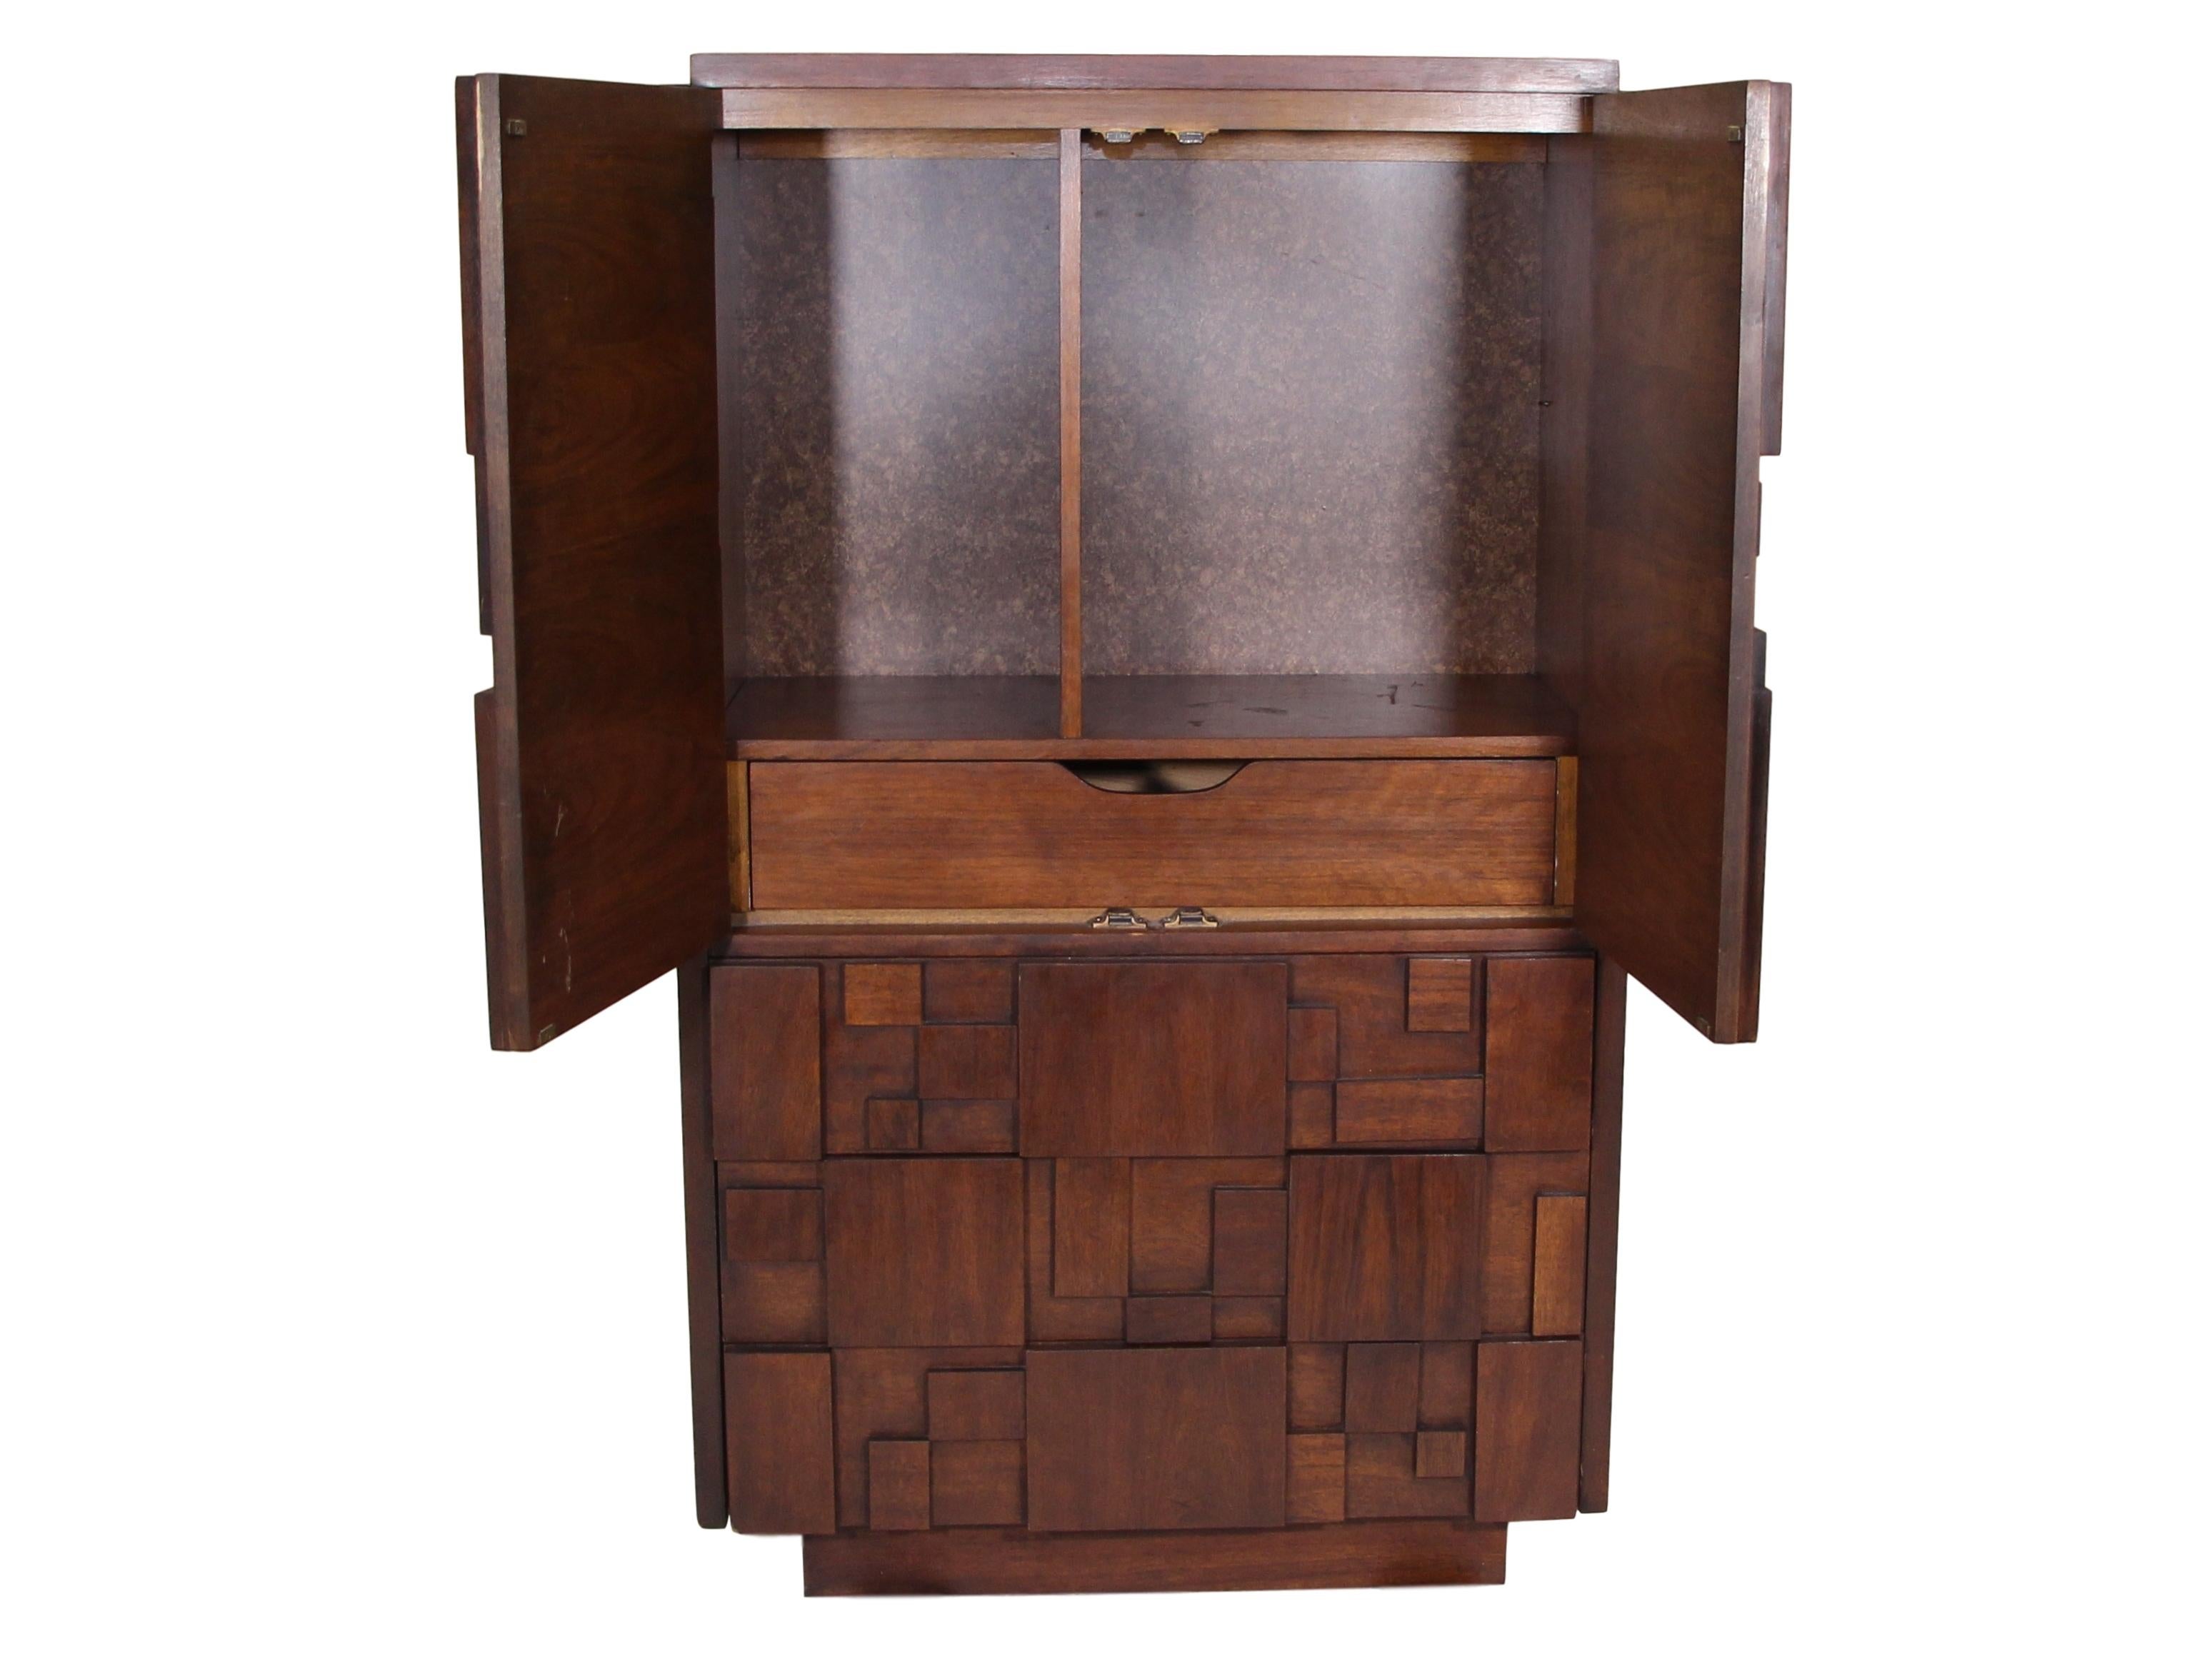 Amazing midcentury American walnut Brutalist single unit 2 door upper cabinets and lower 3-drawer Armoire by Lane. Stamped in a top drawer.

Very good condition. There are 3 repairs on the unit. There is a repair on the top right side. There is a